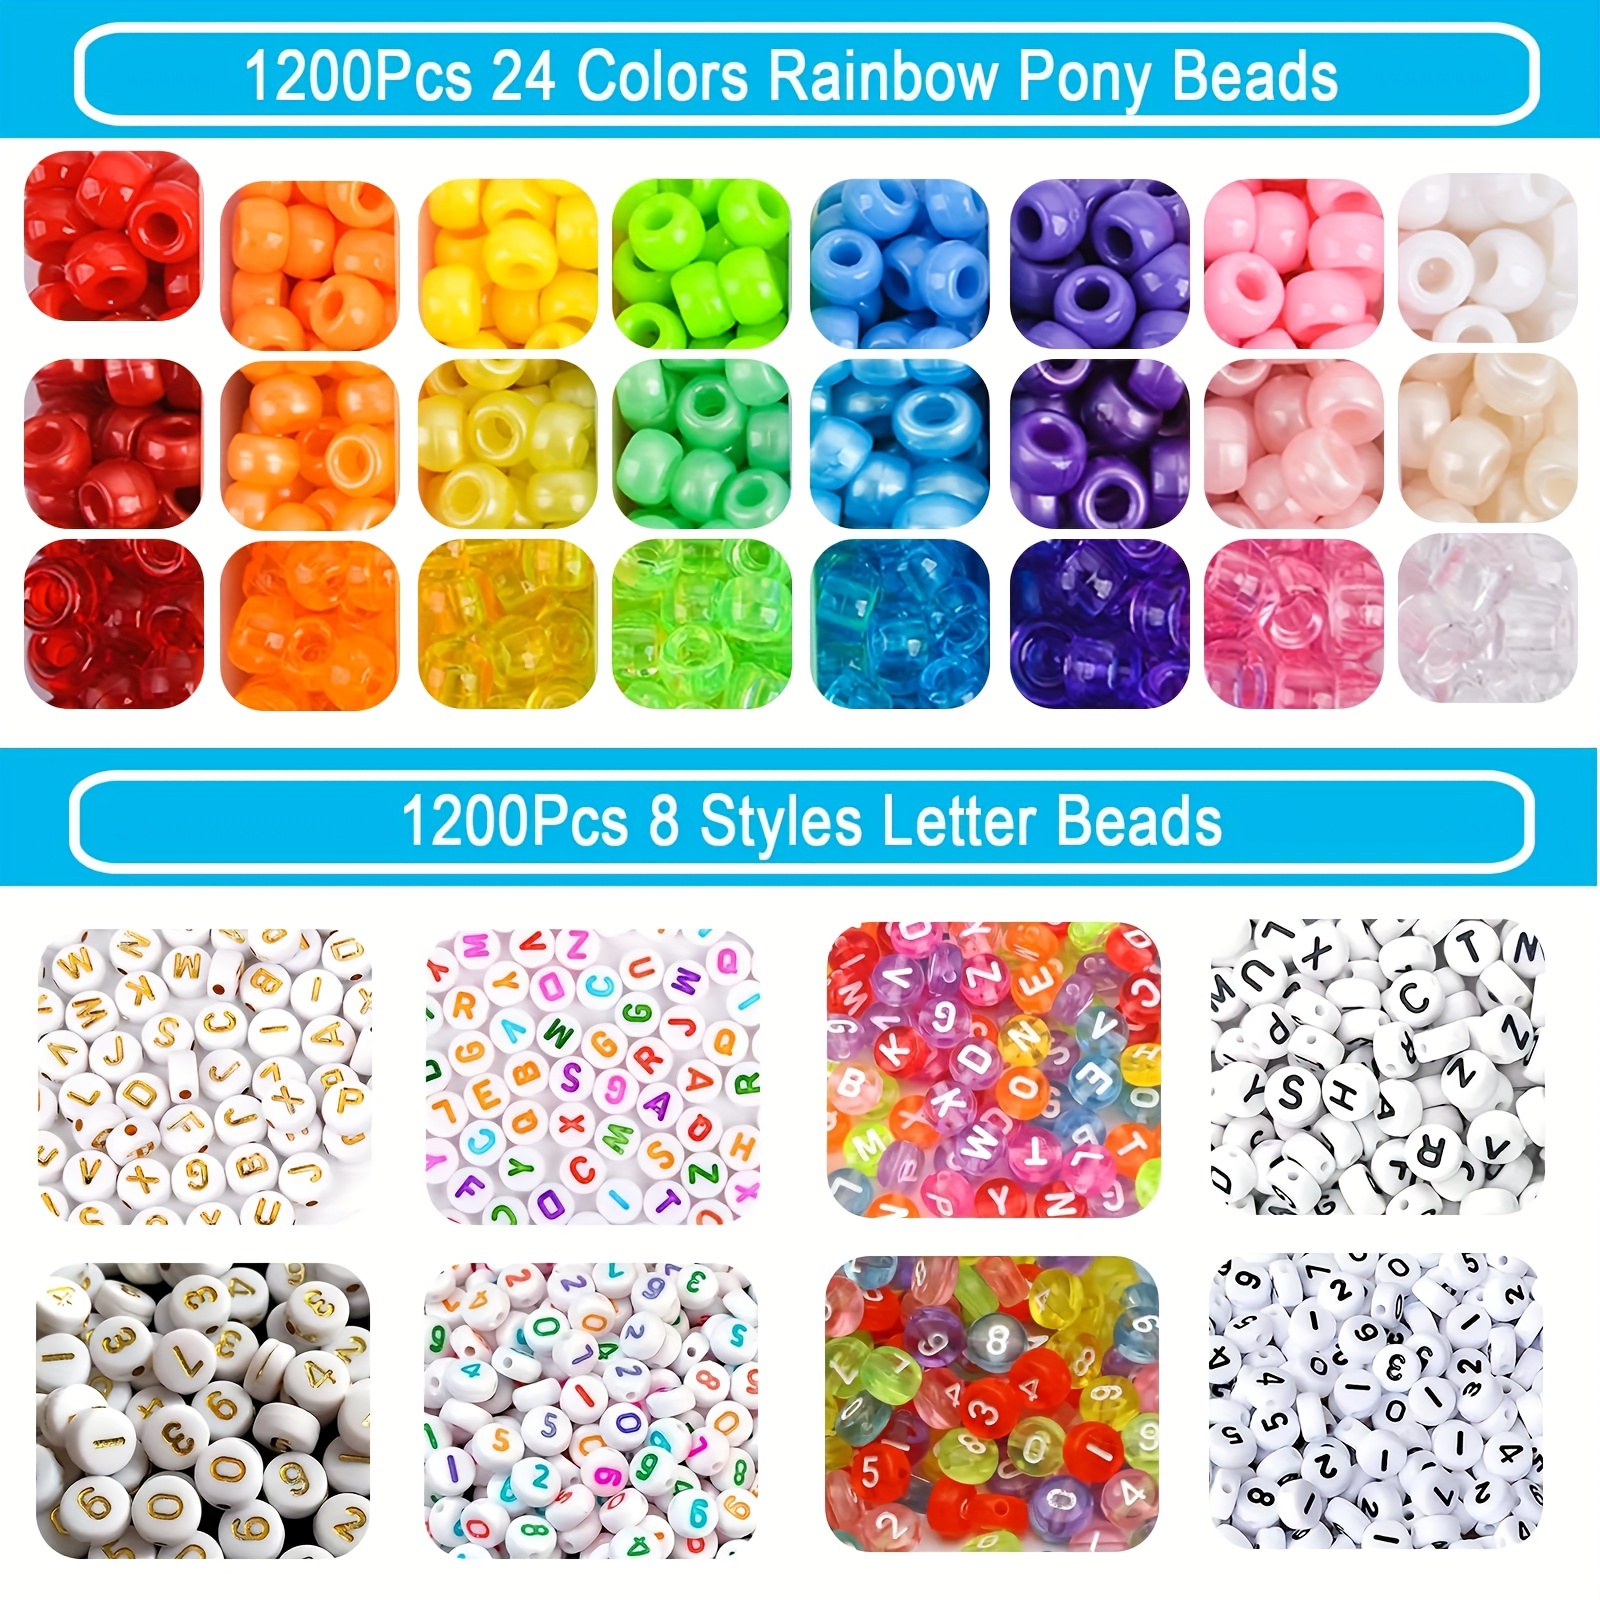 1200pcs Letter Beads 24 Types Acrylic Letter Beads With Round